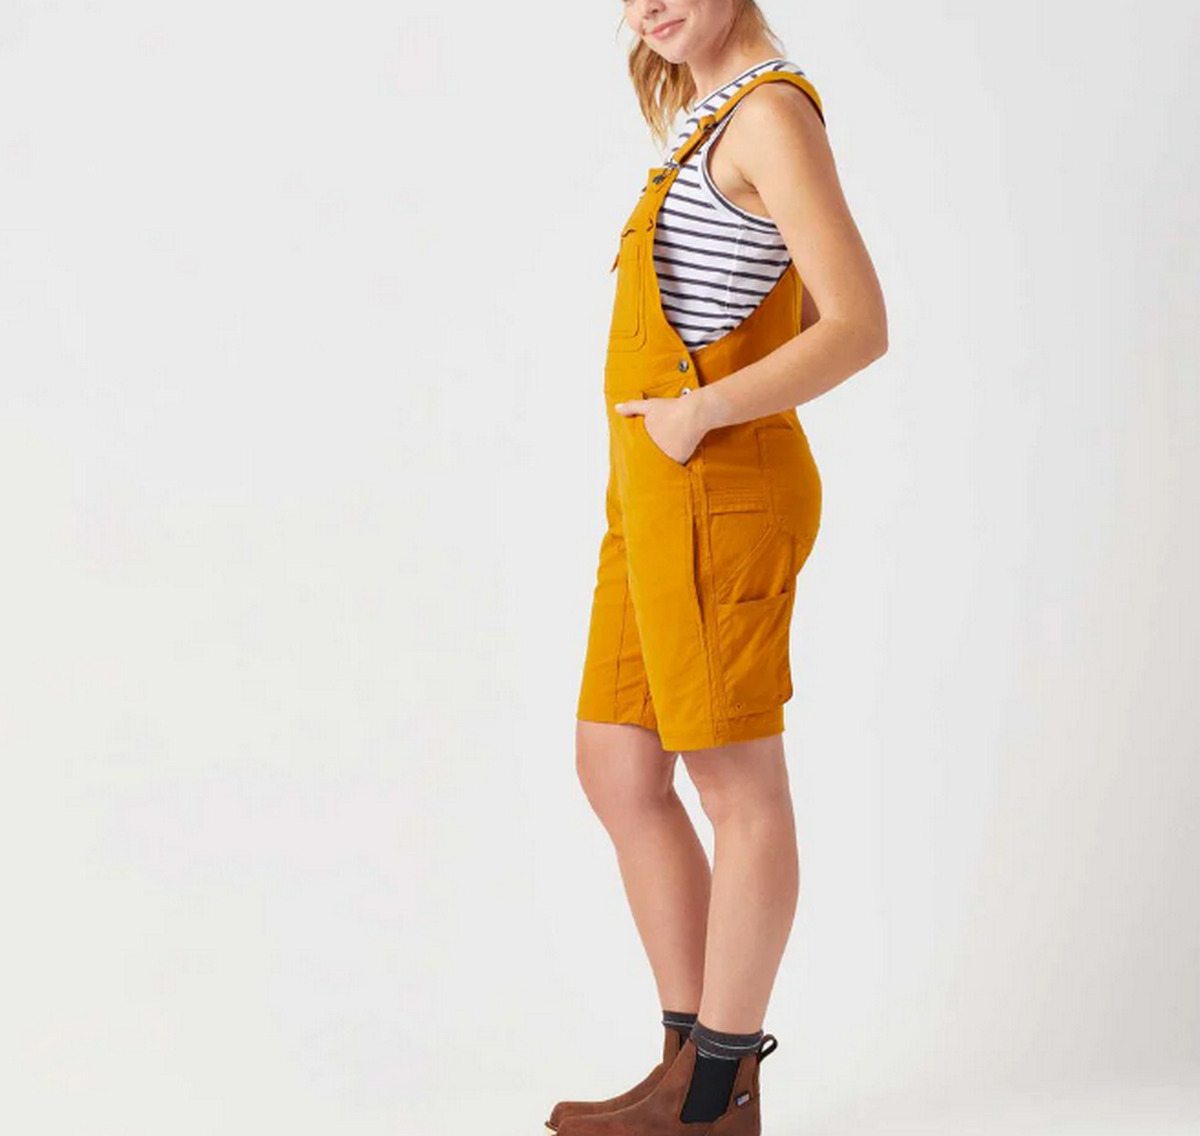 Striped T-Shirt With Short Brown Overalls